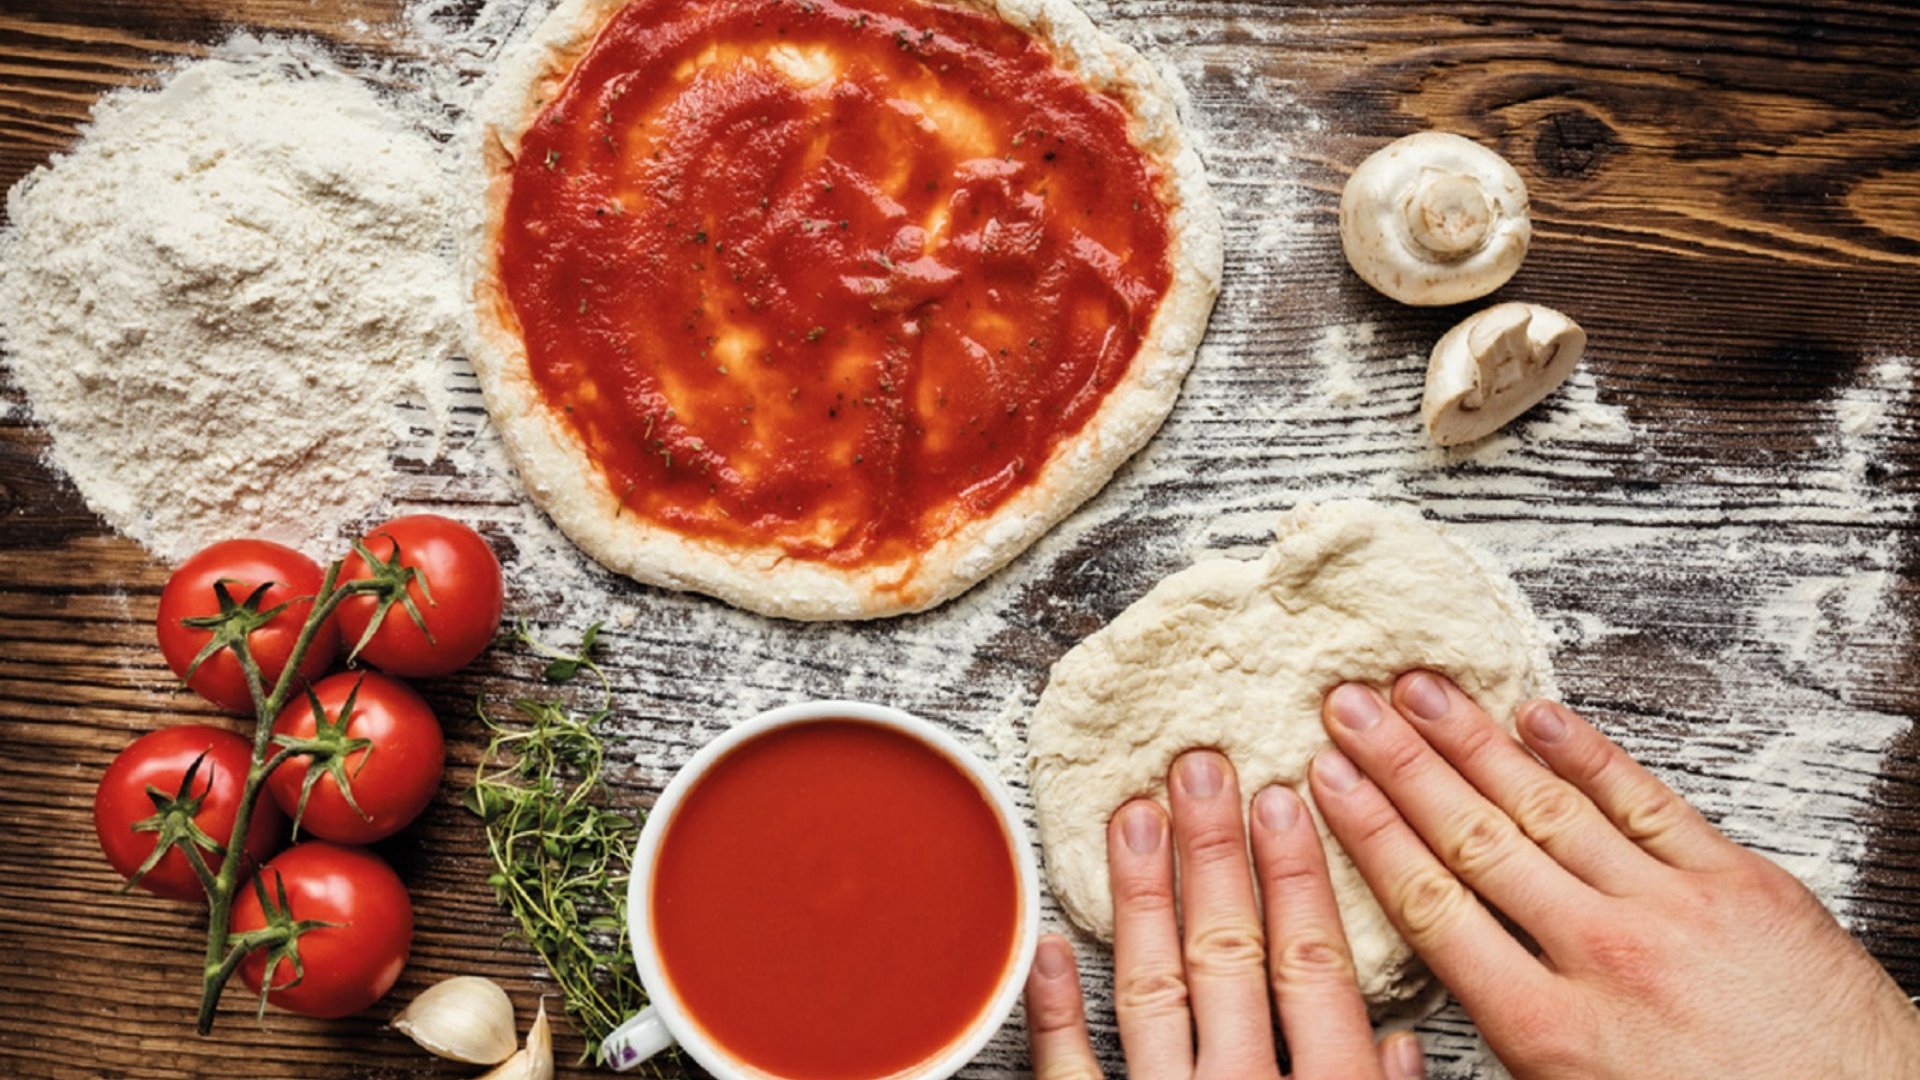 Cooking class in Florence. The secrets of pizza preparation in this cooking class in Florence